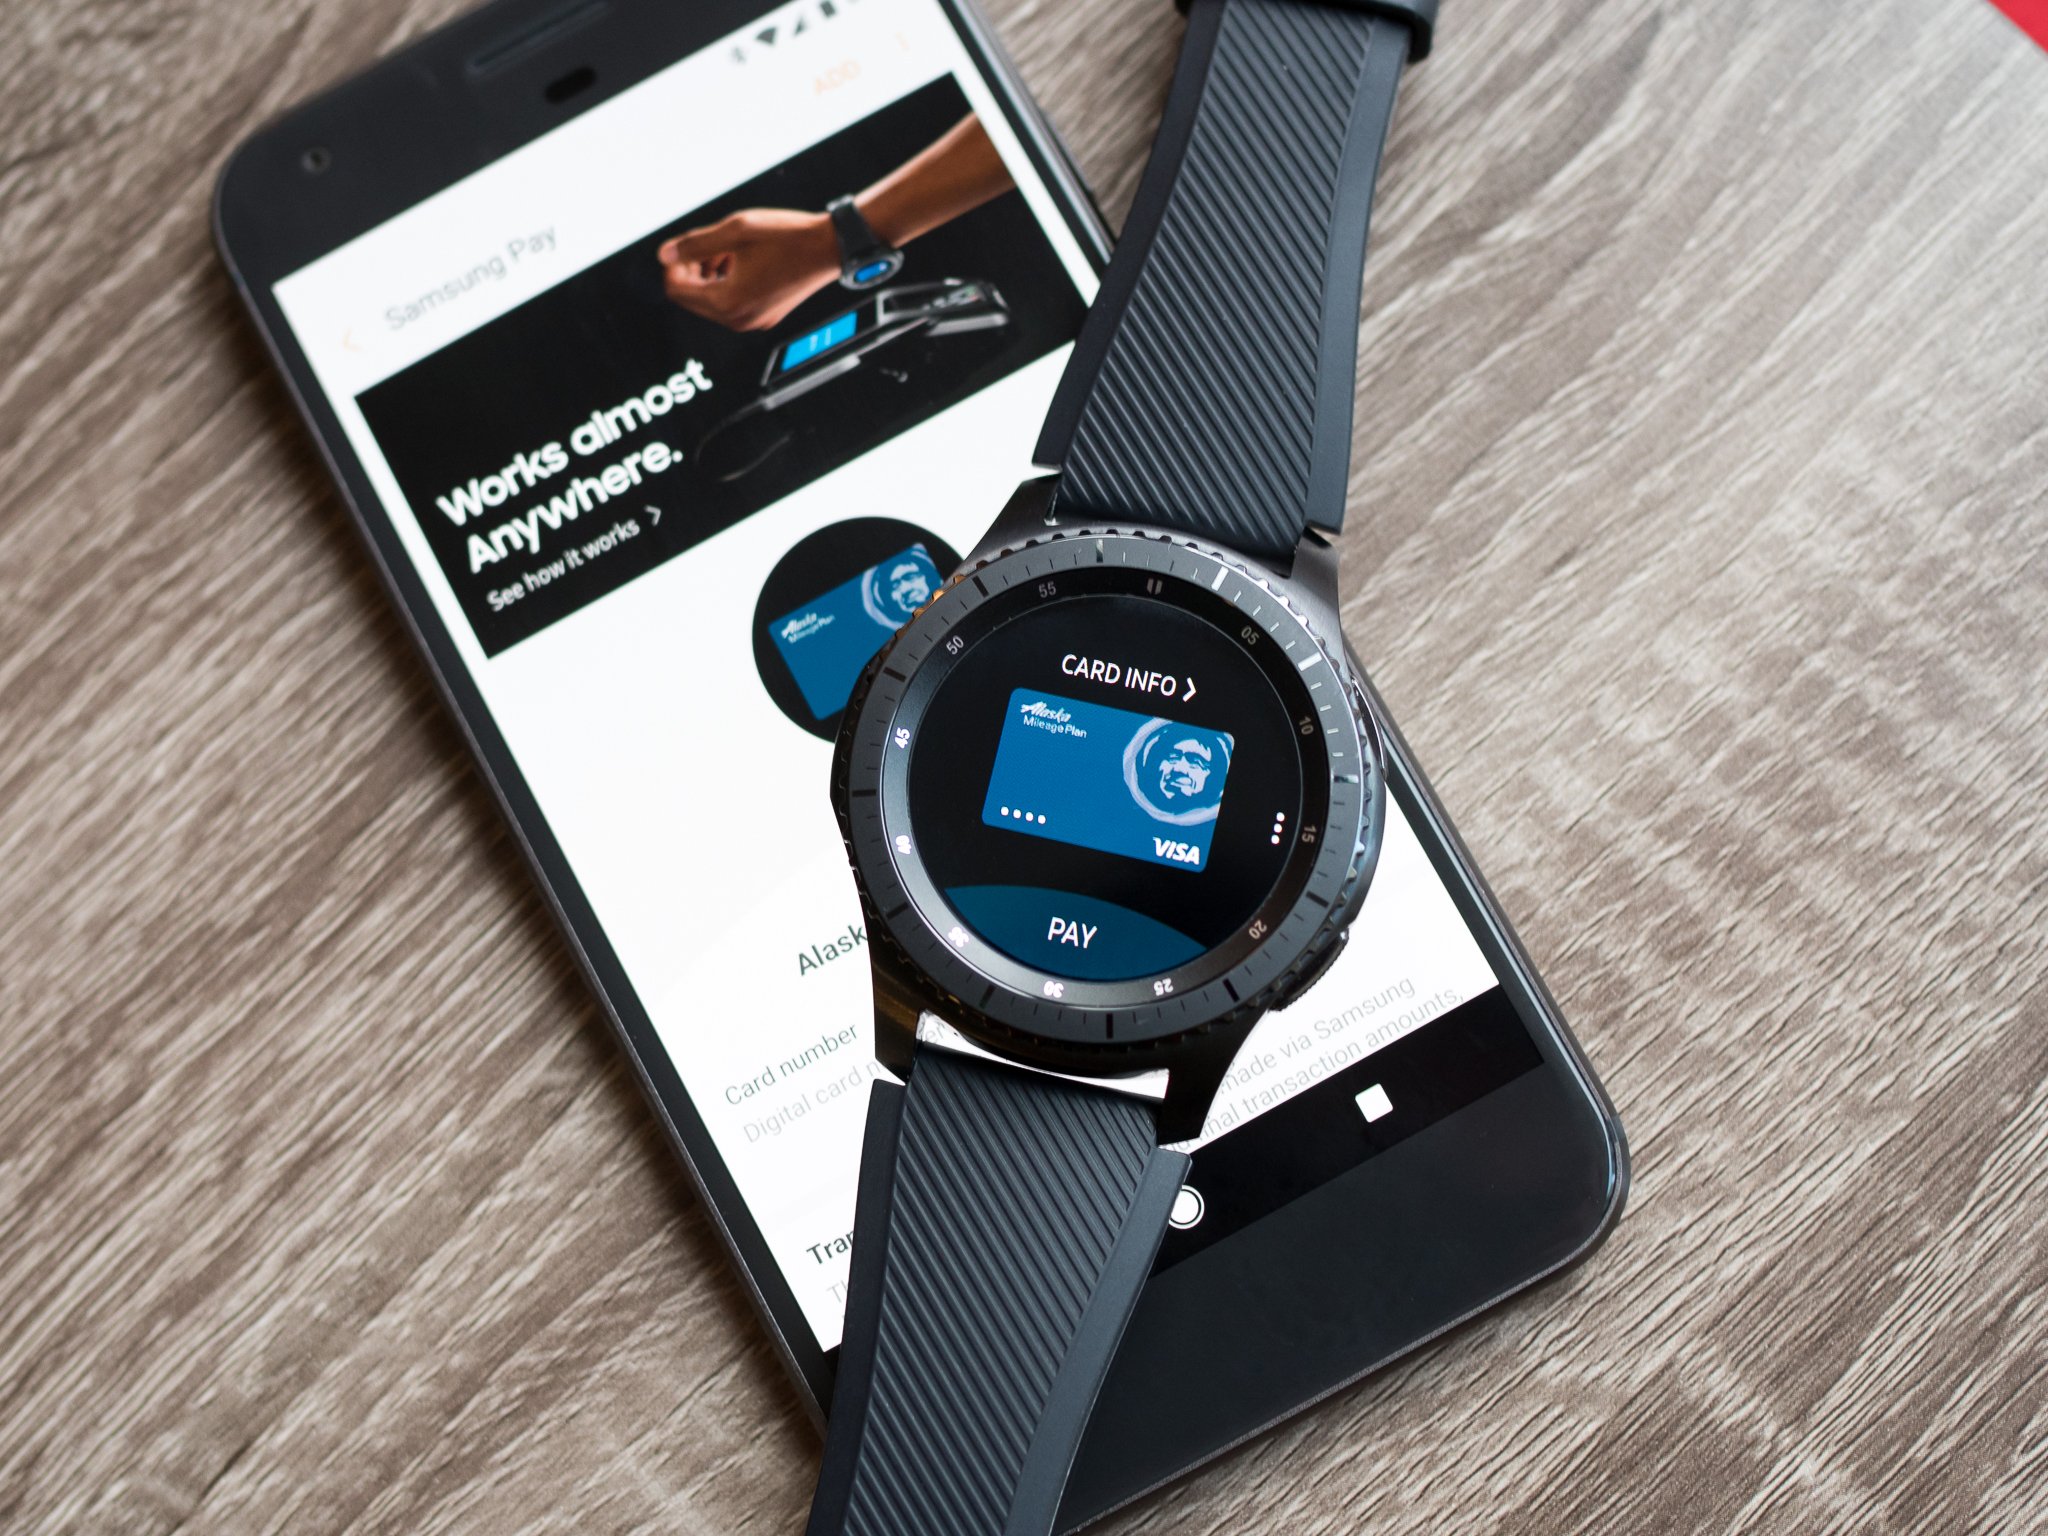 How to use Samsung Pay on the Gear S3 